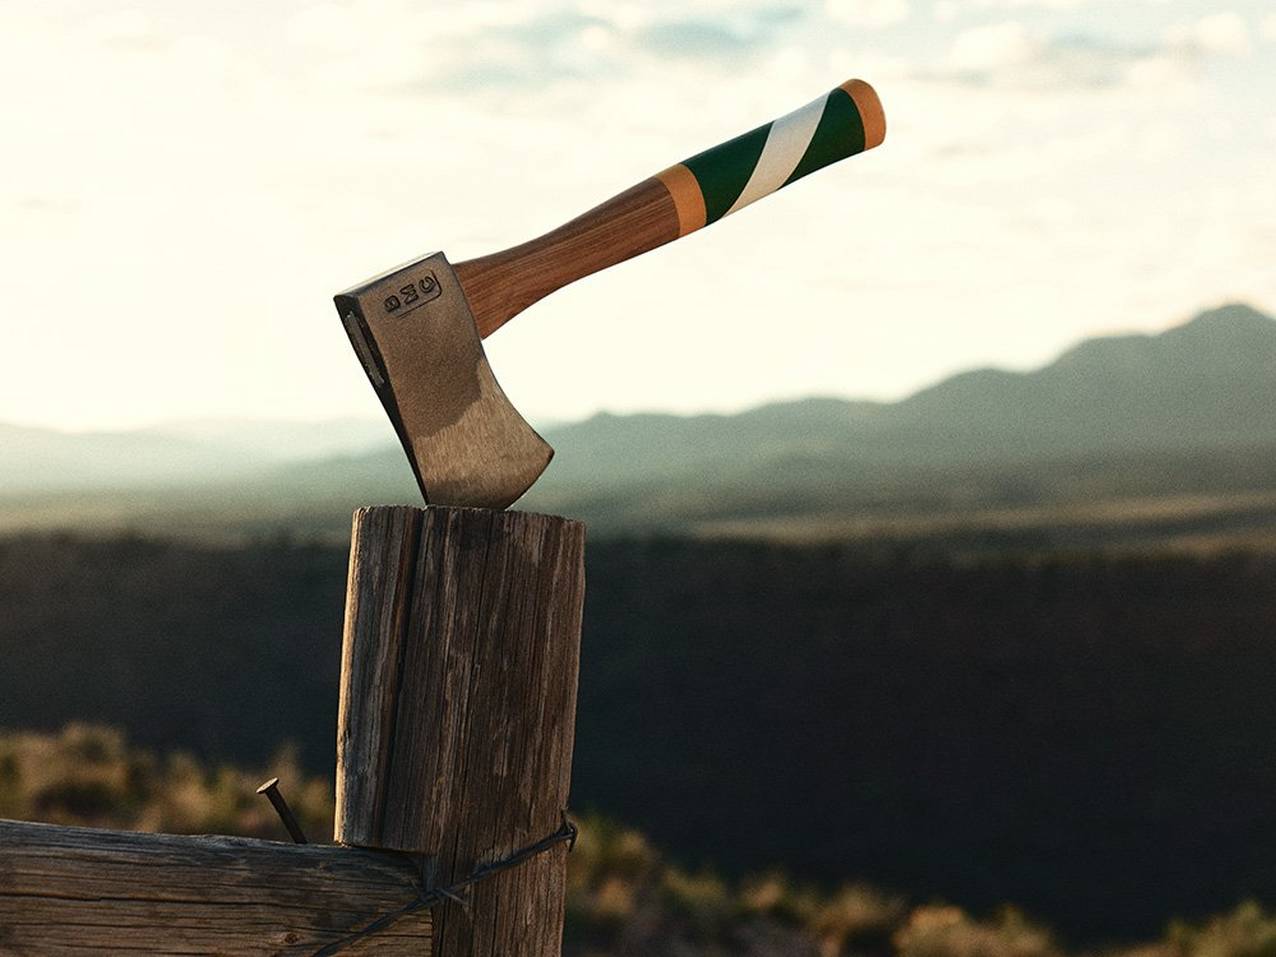 A Best Made hatchet with a colorful handle sticks into a wooden fence post in front of a mountain scene.